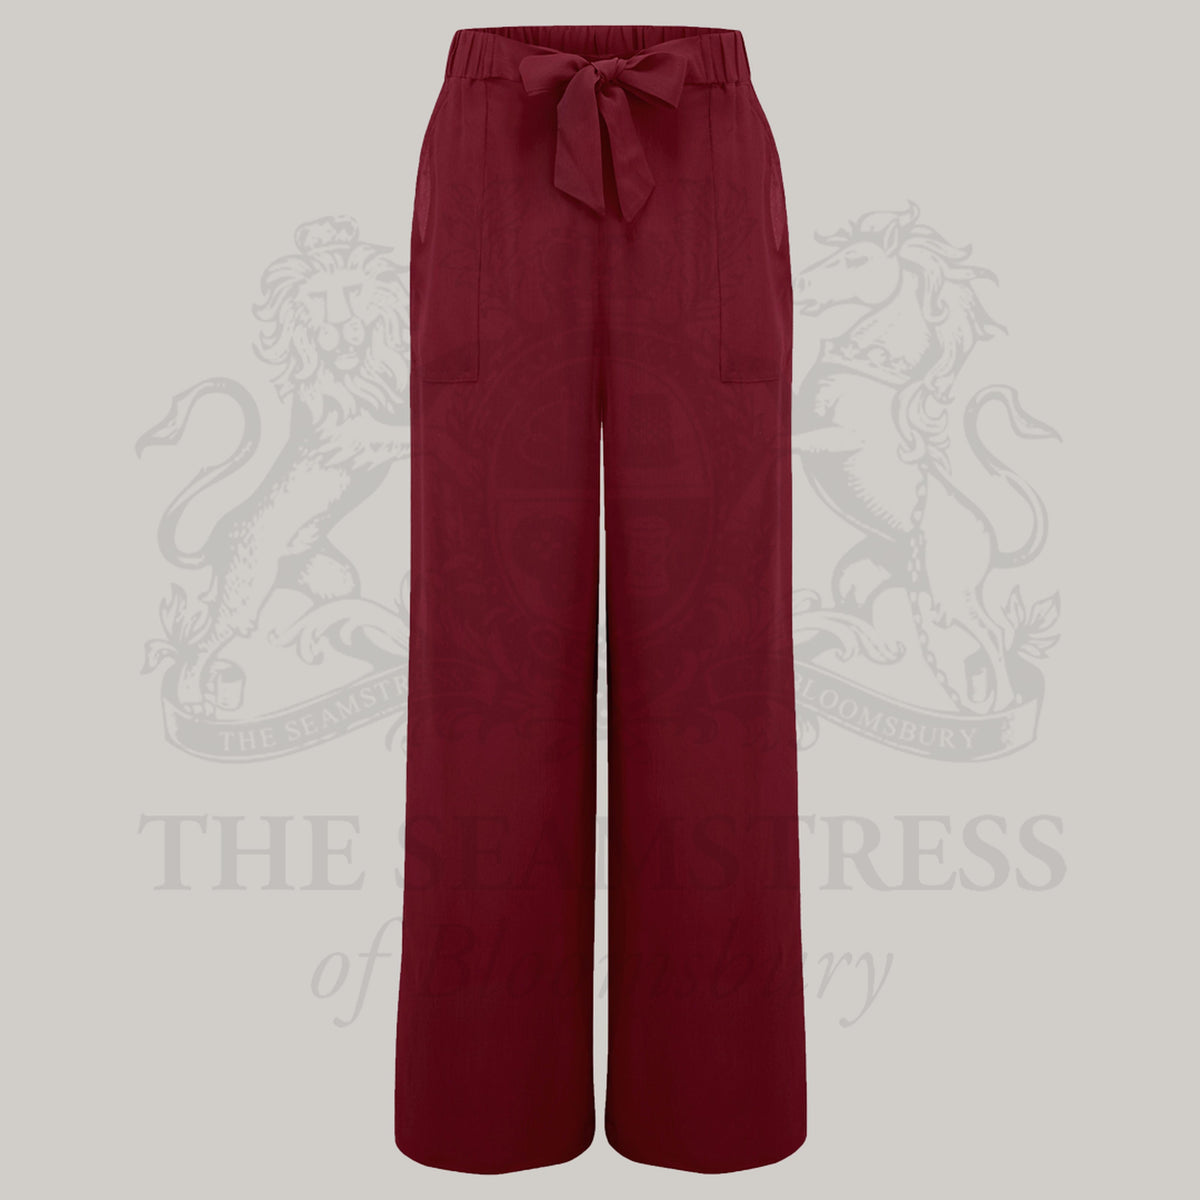 1940s style wrap burguny pyjamas. Consists of a full length gown with a revere collar and tie wrap waist, and wide leg elasticated waist trousers. 